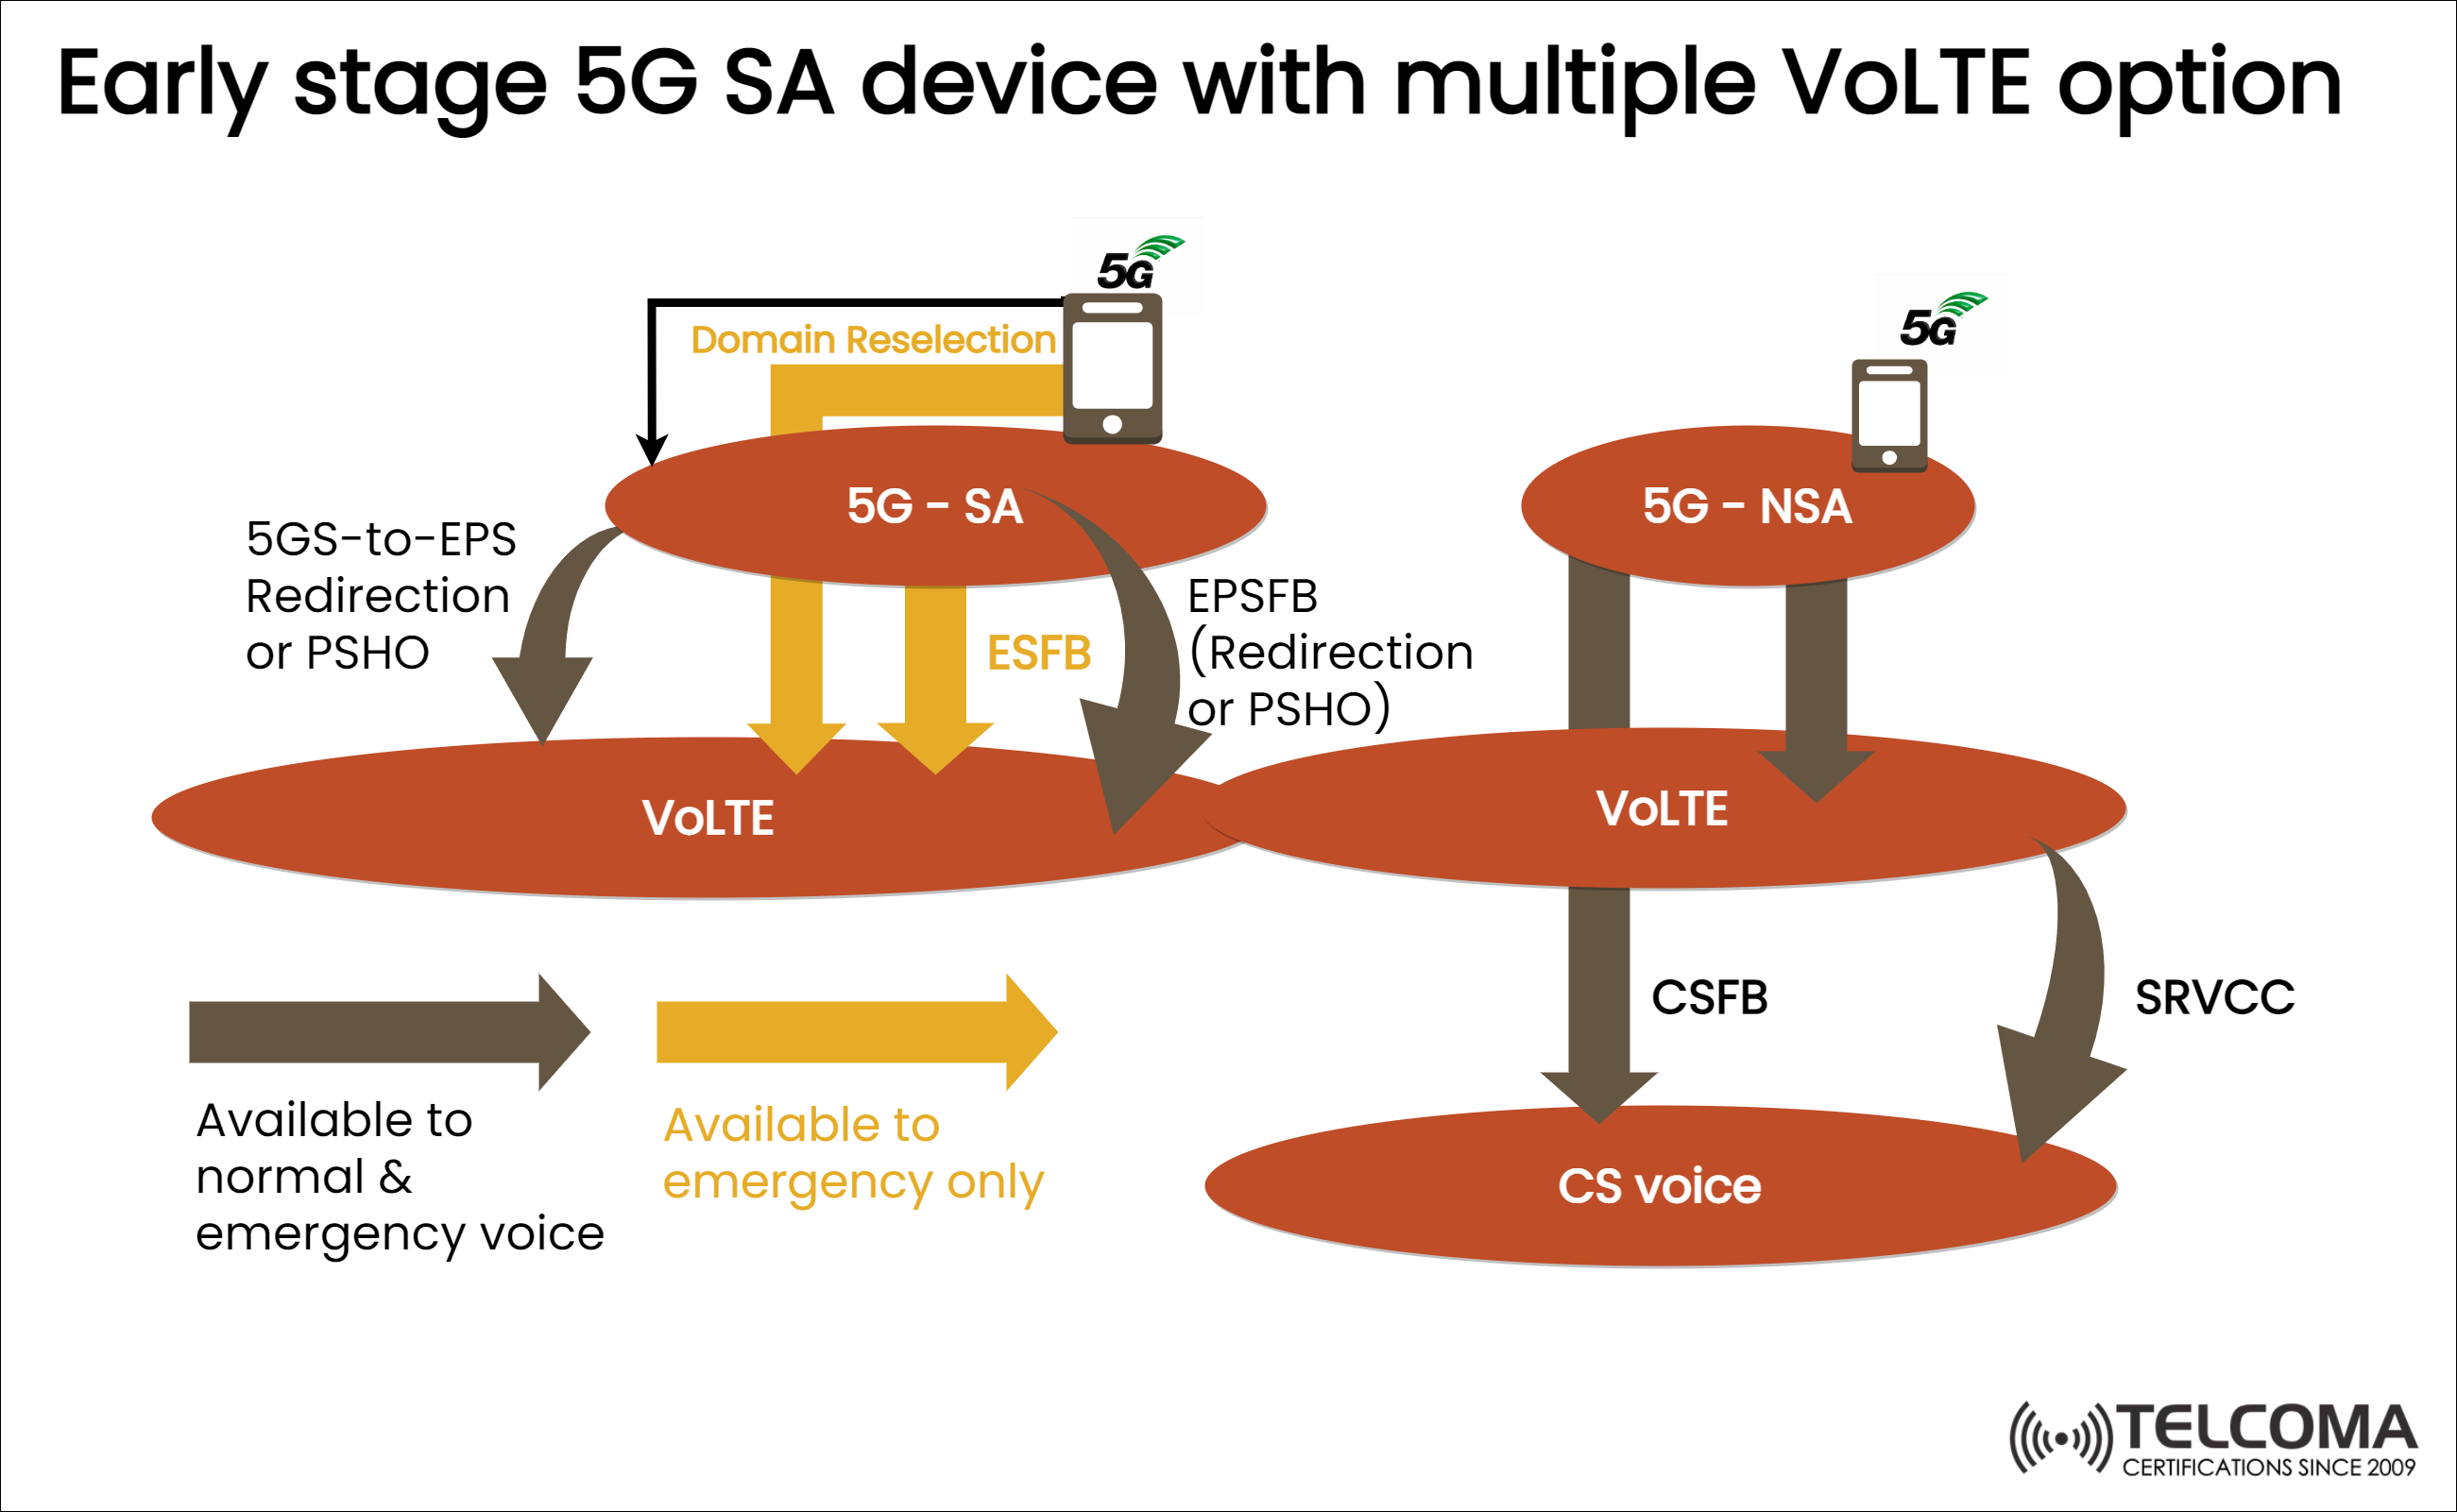 5g SA device with VoLTE option